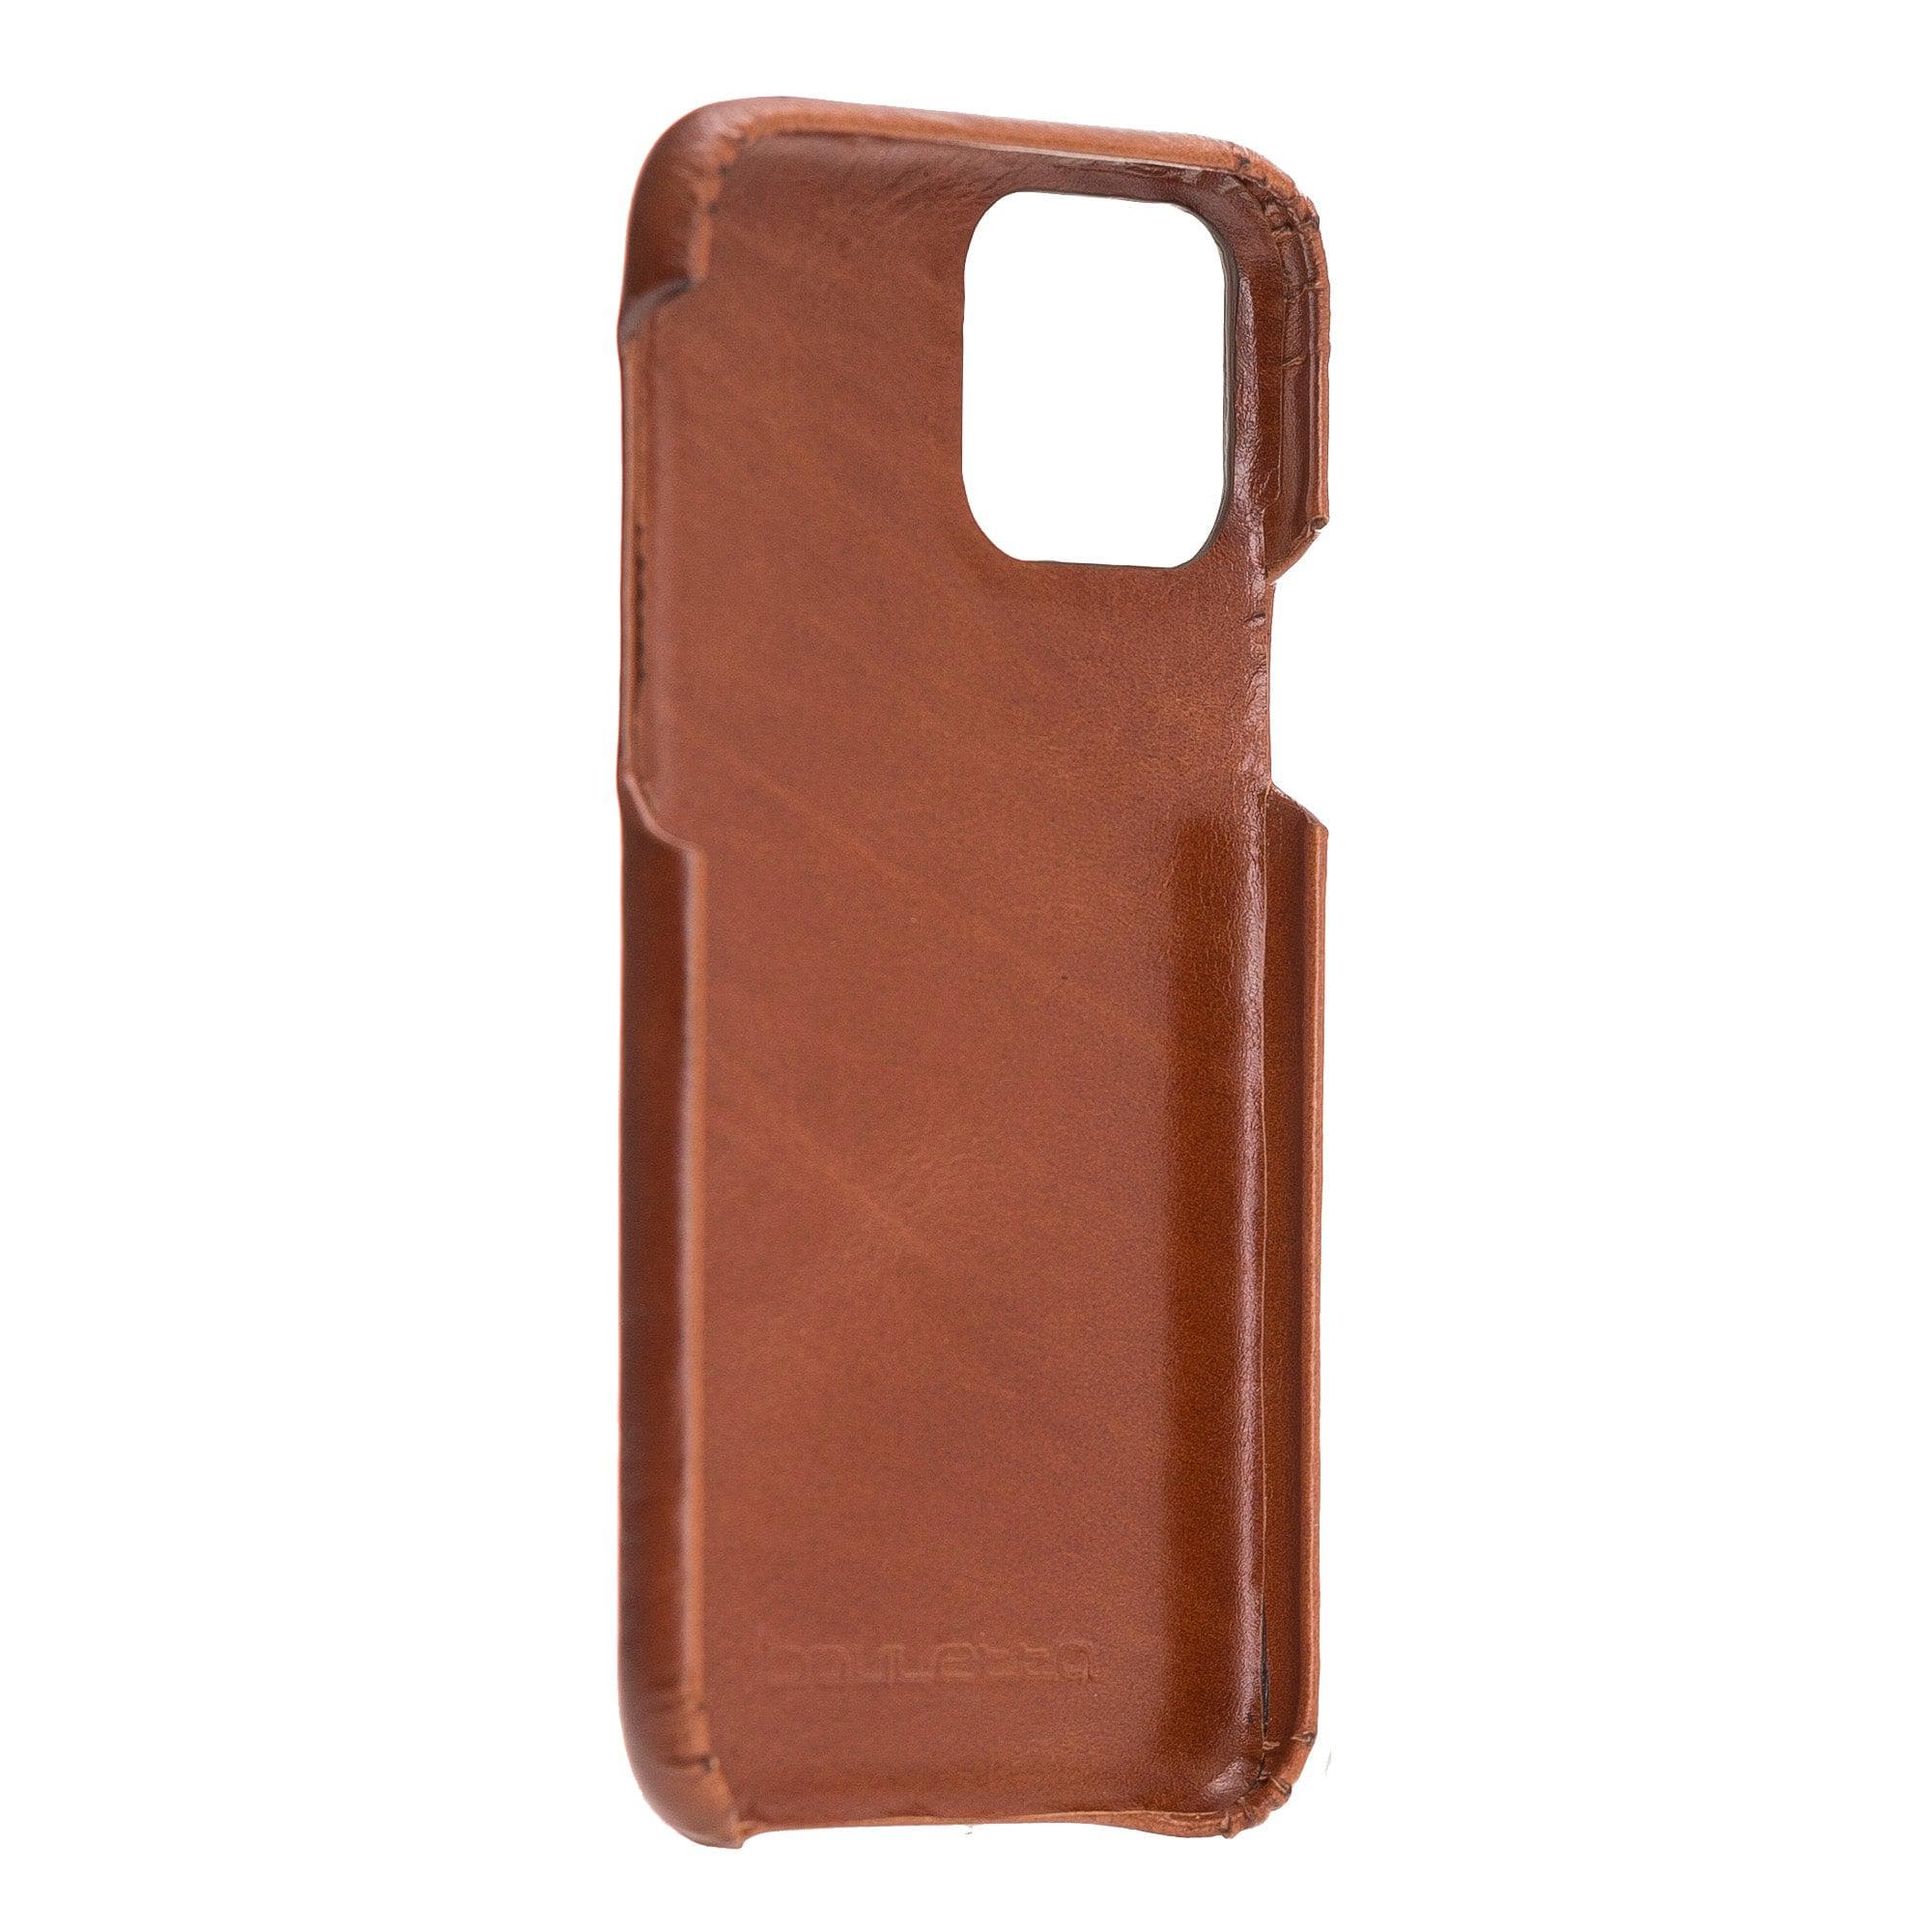 Mobile Phone Cases F360 Leather Wallet Case For Apple iPhone 11 Series Bouletta Shop